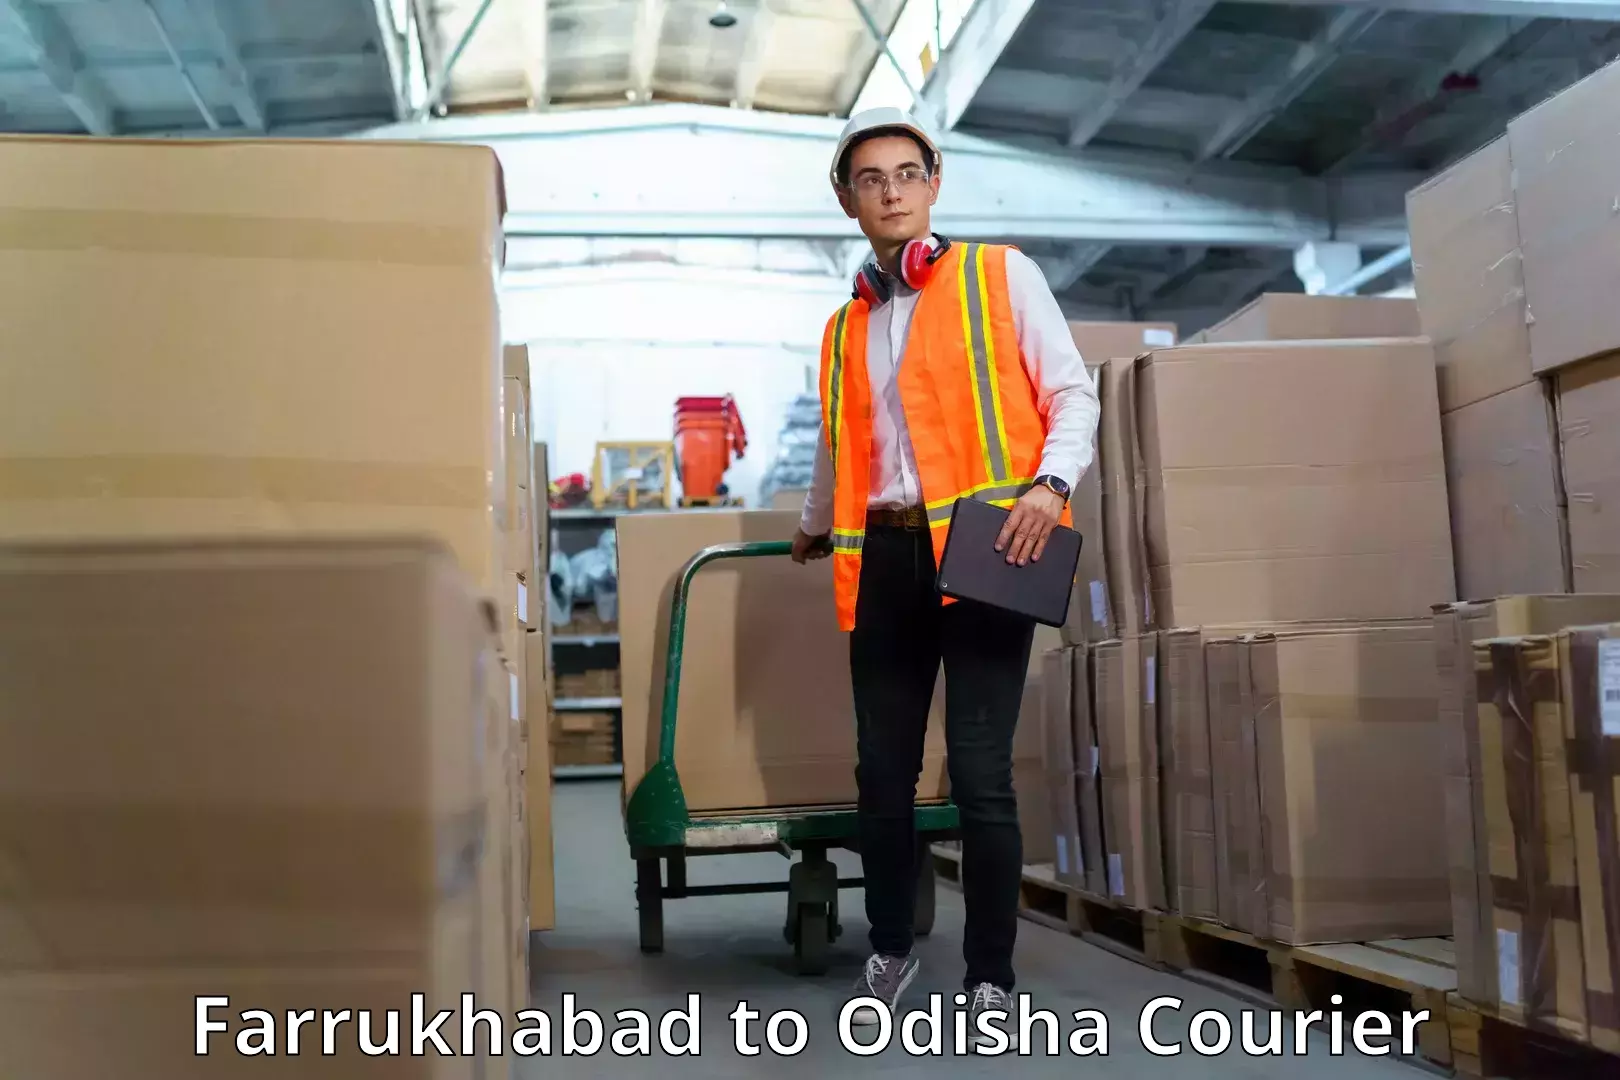 State-of-the-art courier technology Farrukhabad to Kuchinda